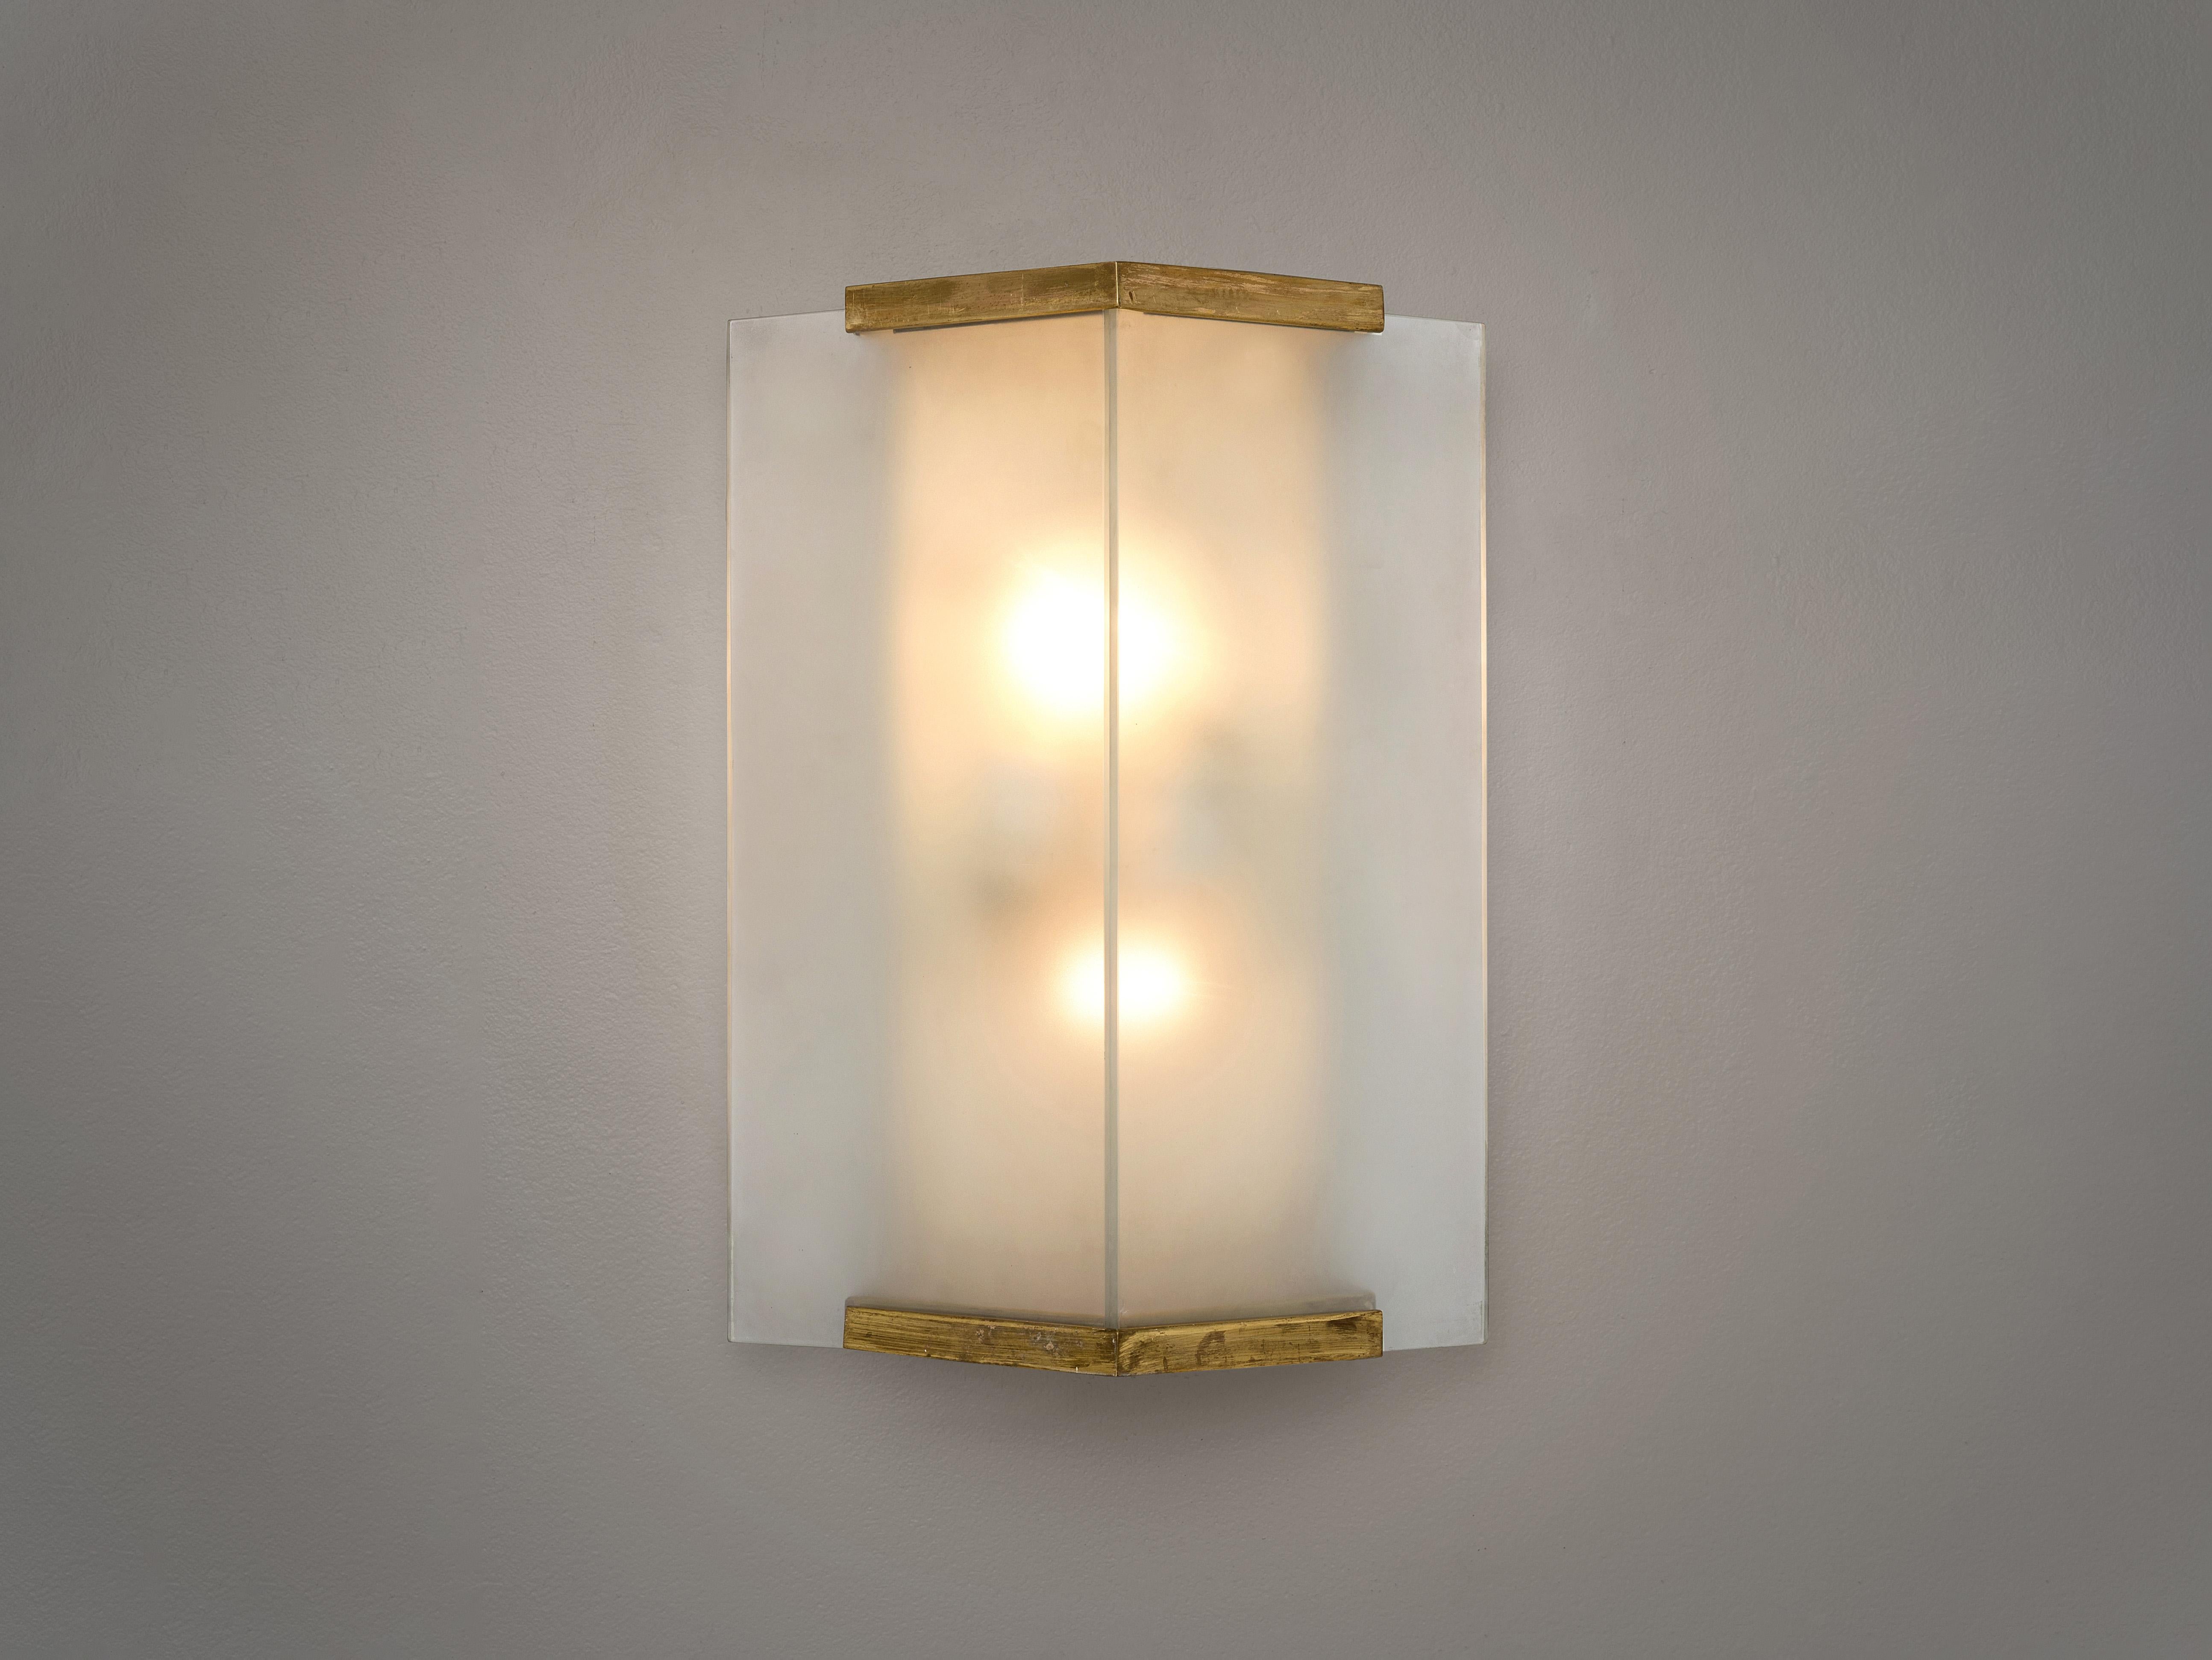 Wall lights, brass, frosted glass, Europe, 1930s.

These simplistic geometric sturdy wall lights give off a warm light partition thanks to the thick, high-quality glass. The lights feature a double, symmetrical lay-out with triangle glass